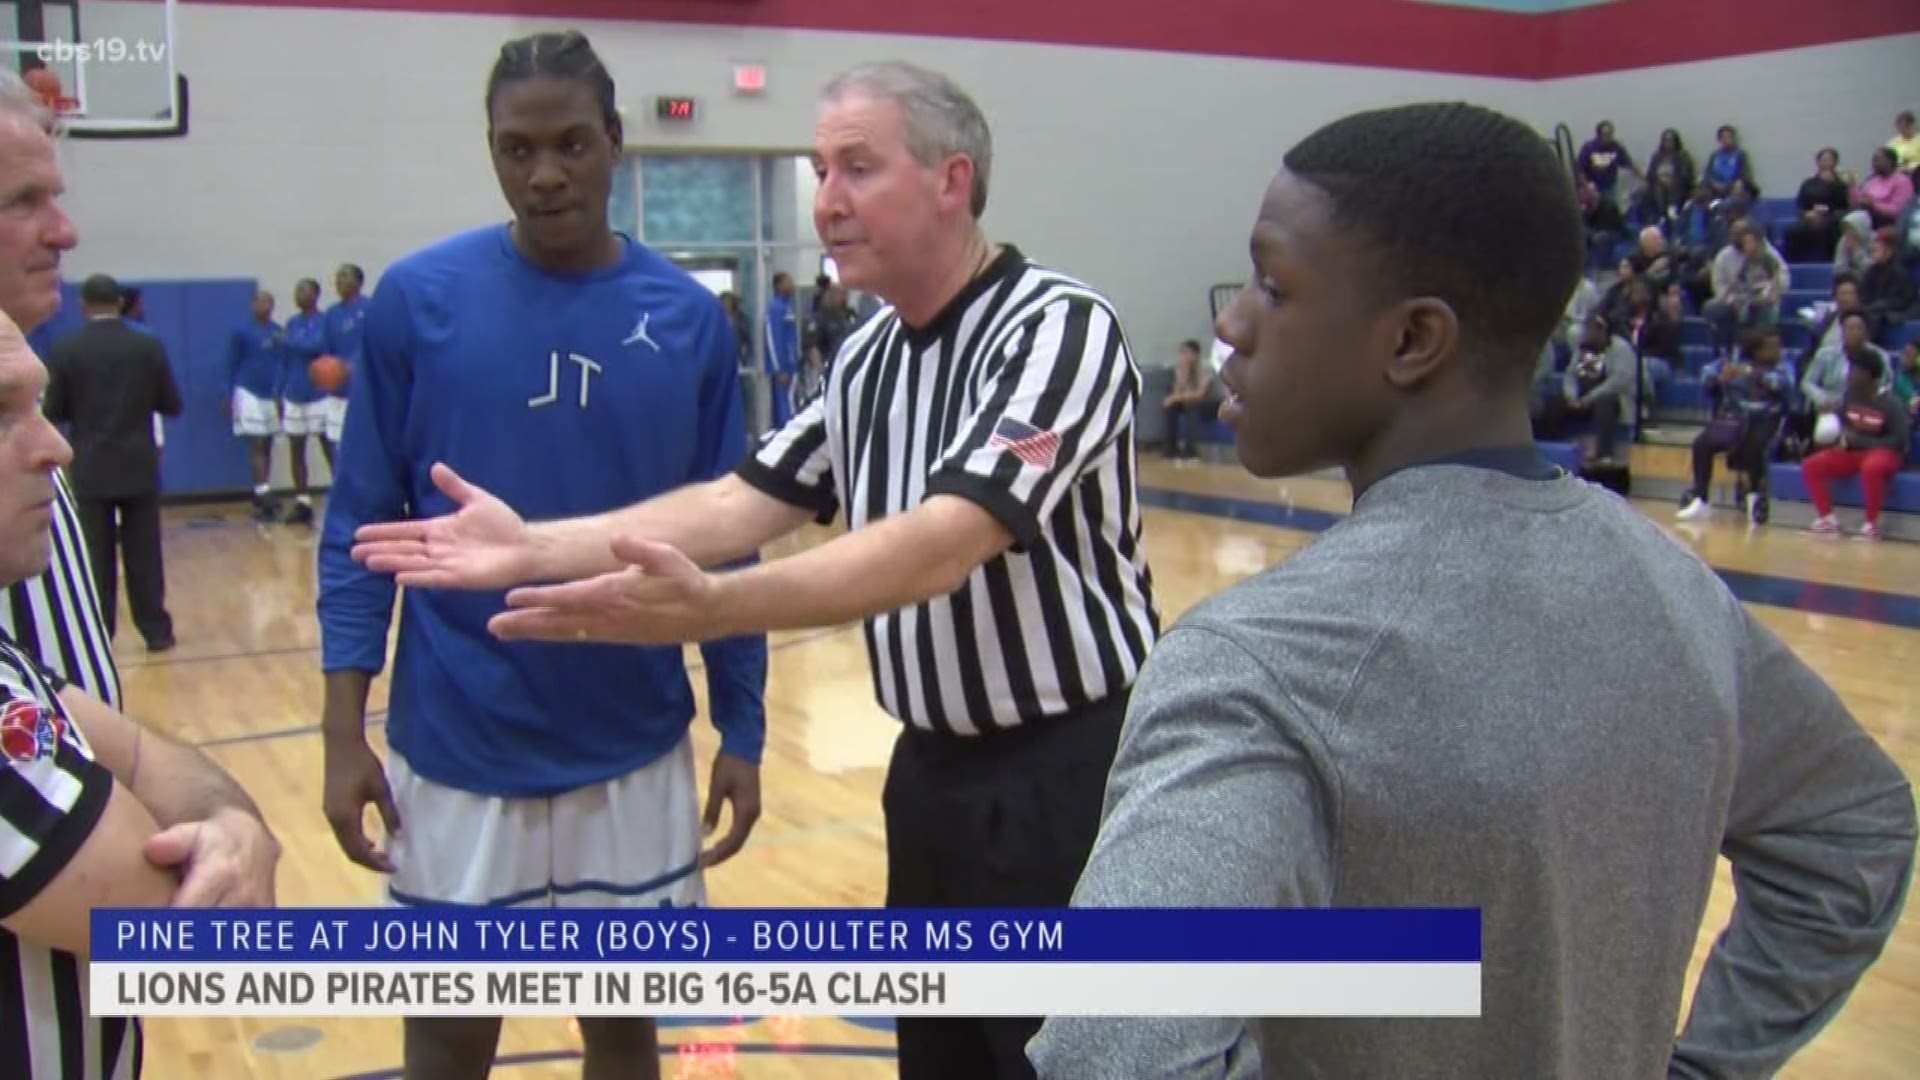 Take a look at some of the highlights from a busy night of high school basketball.